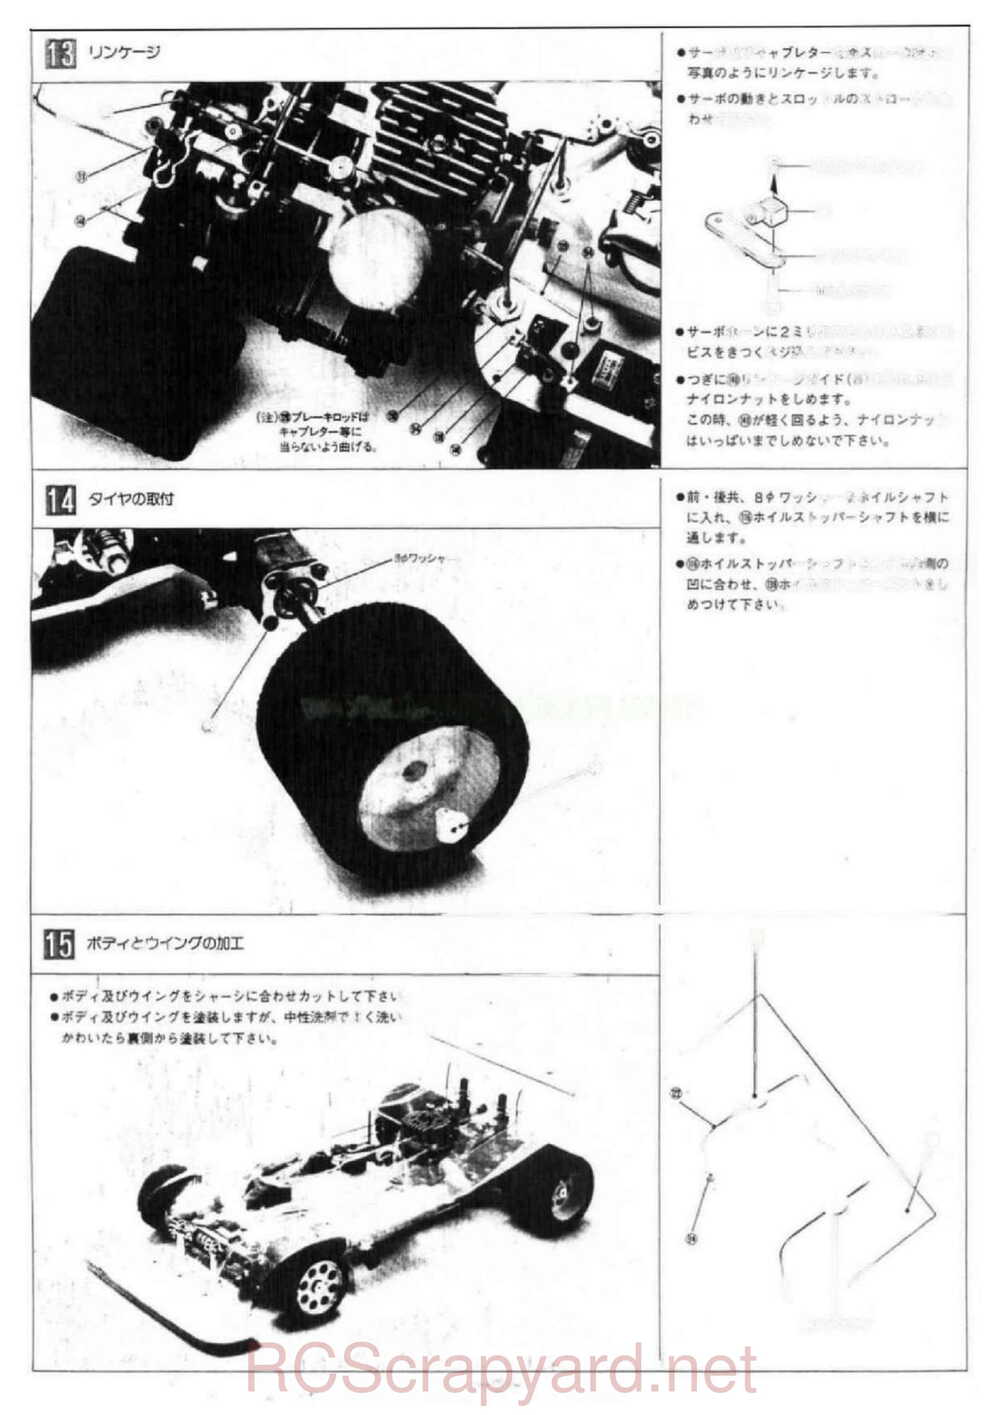 Kyosho - 3121 - Fantom-21 4iS - Manual - Page 08